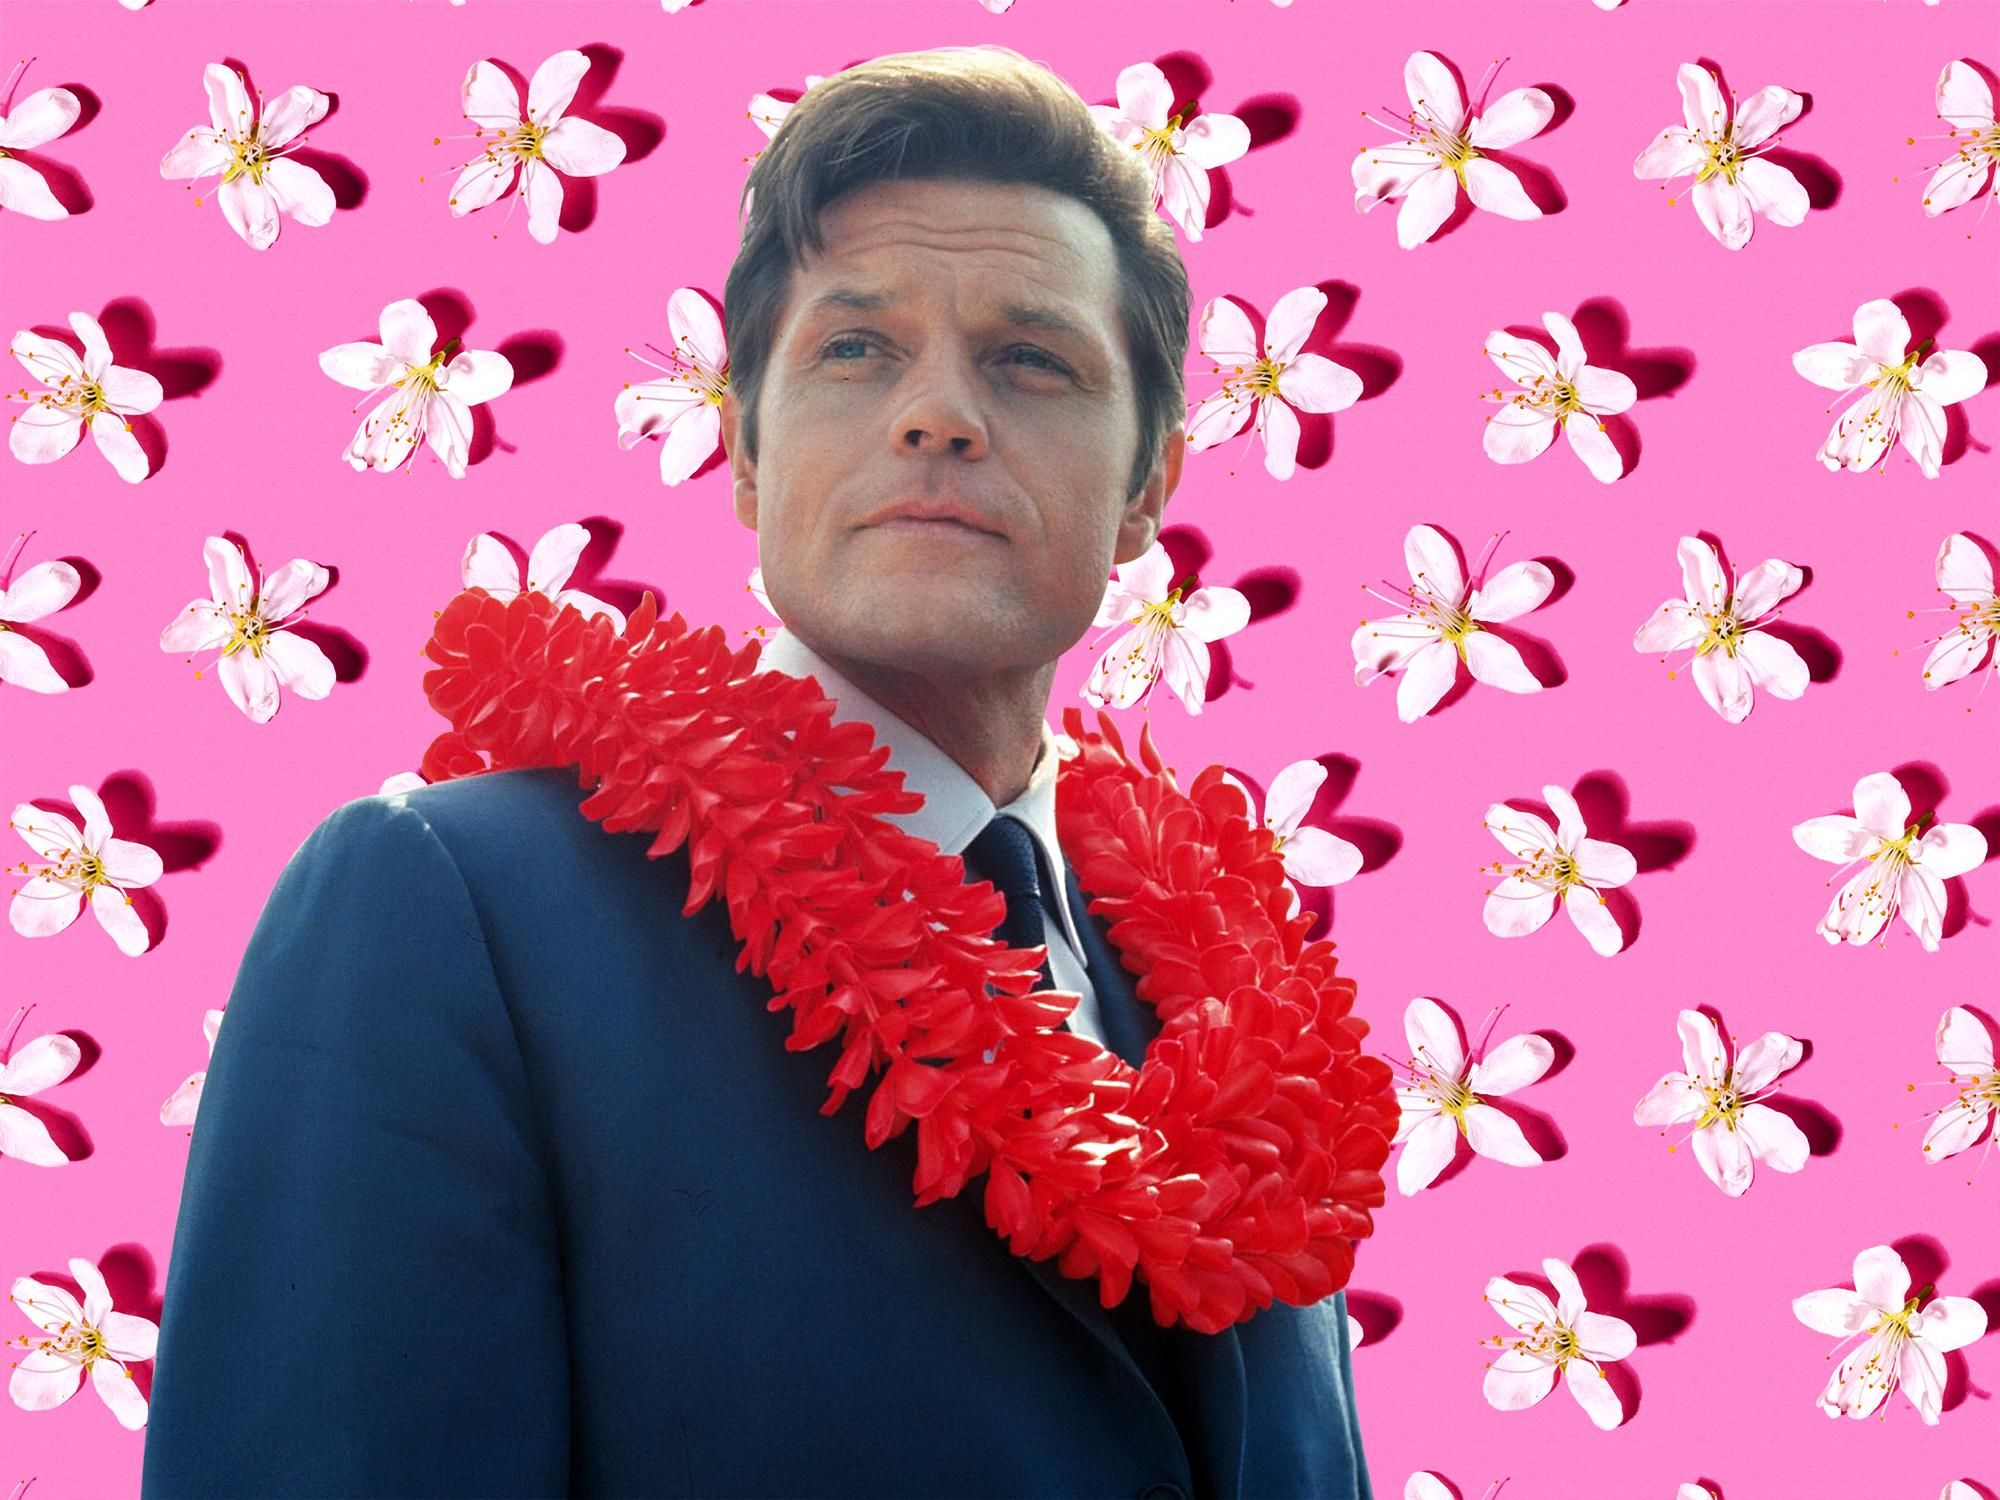 Jack Lord of Hawaii Five-O poses against a pink floral backdrop while wearing a navy suit with a bright red flower lei around his neck.